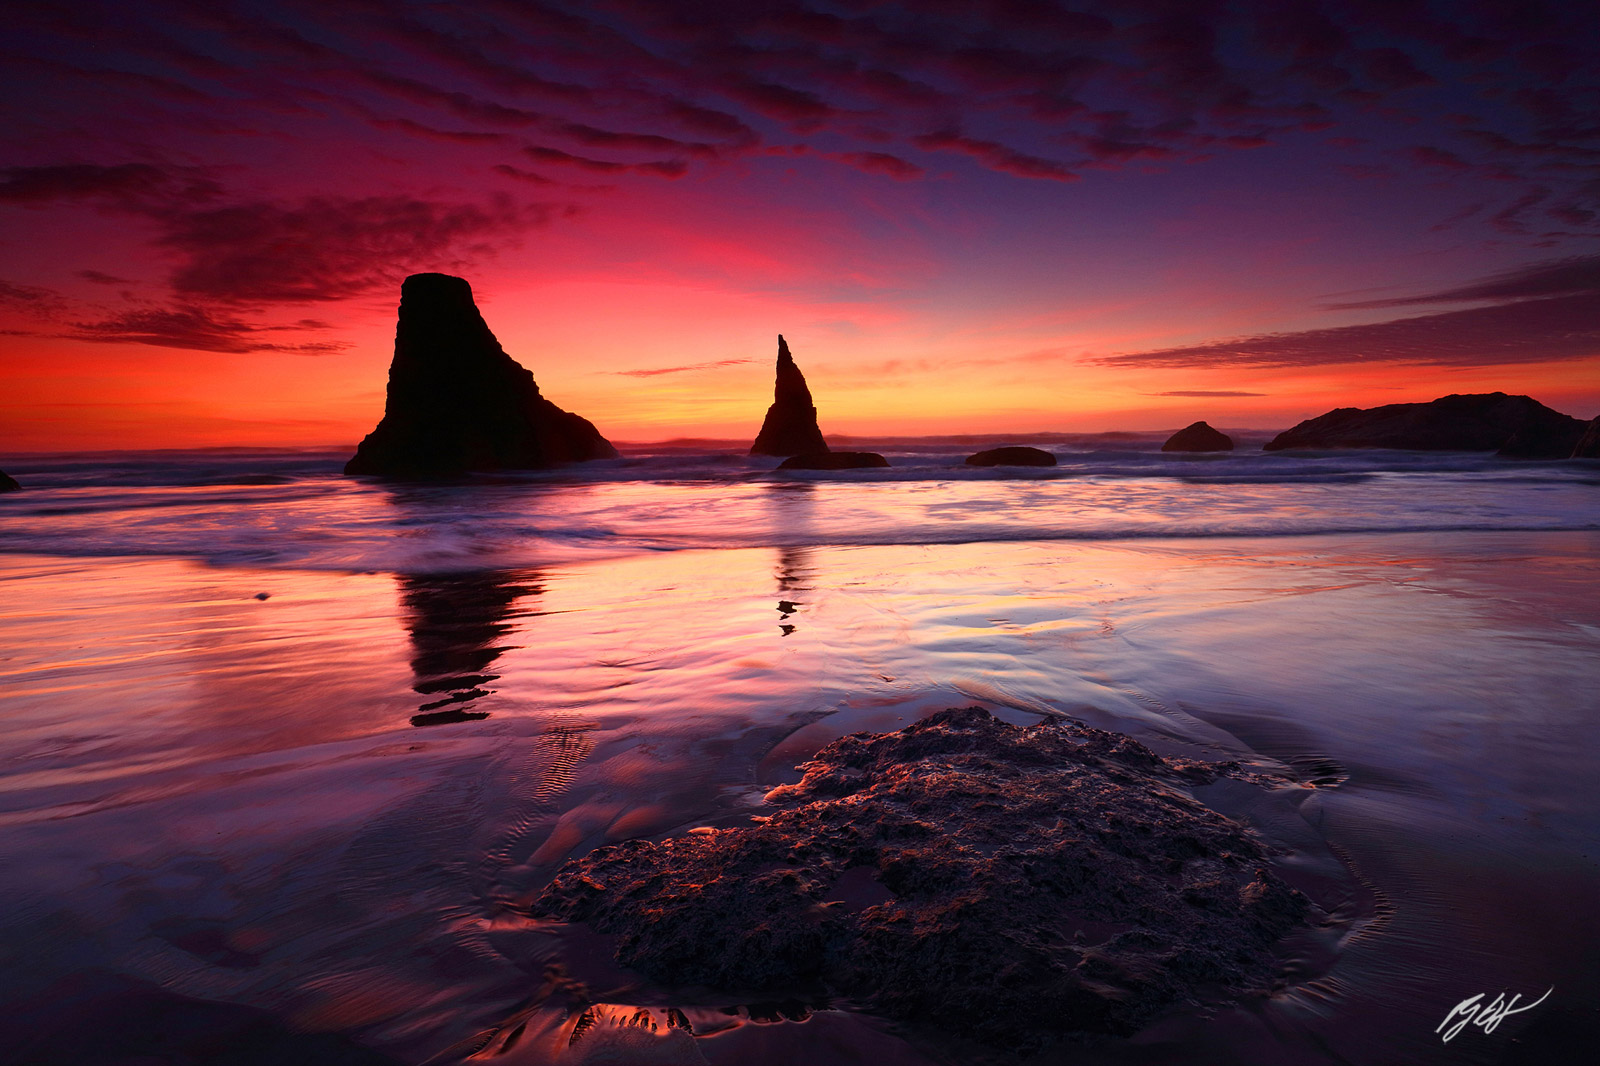 Sunset and the Wizards Hat from Face Rock Beach in Bandon on the Southern Oregon